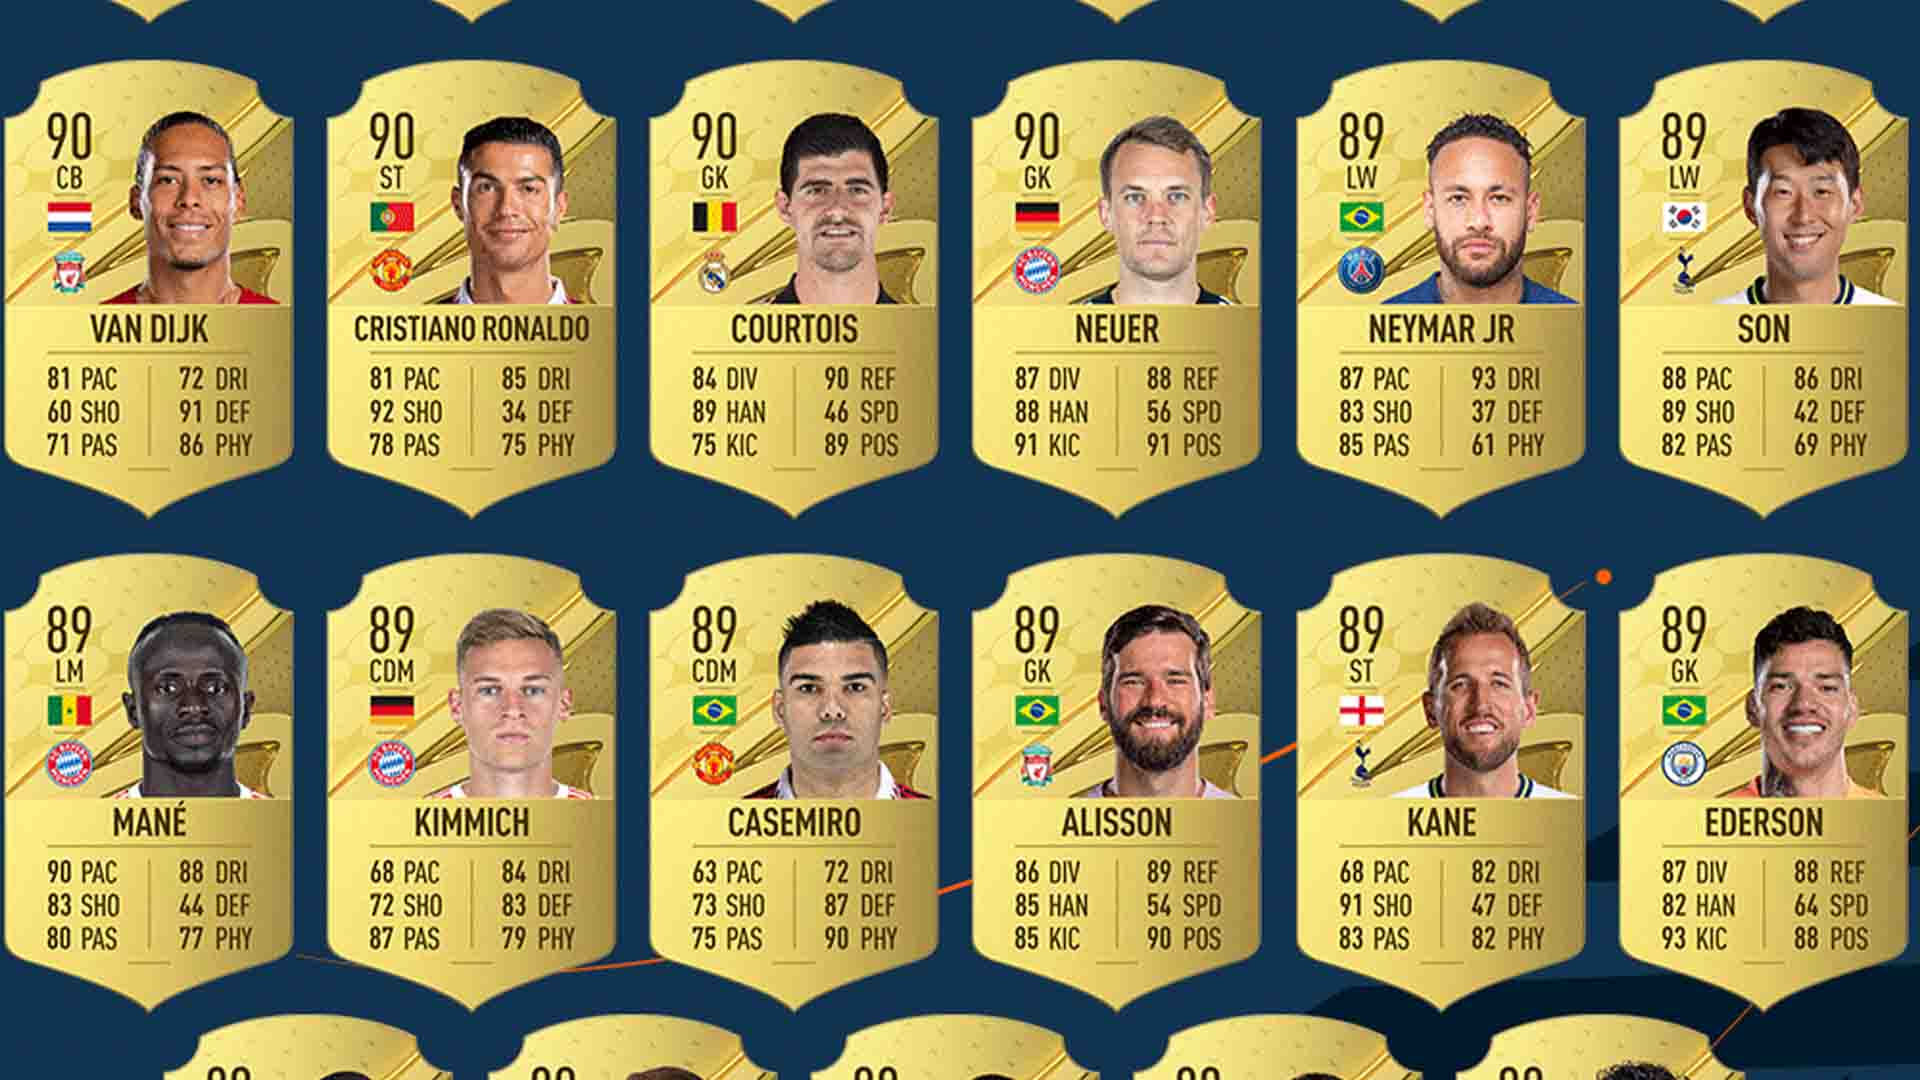 https://www.godisageek.com/wp-content/uploads/FIFA-23-top-rated-players-revealed.jpg